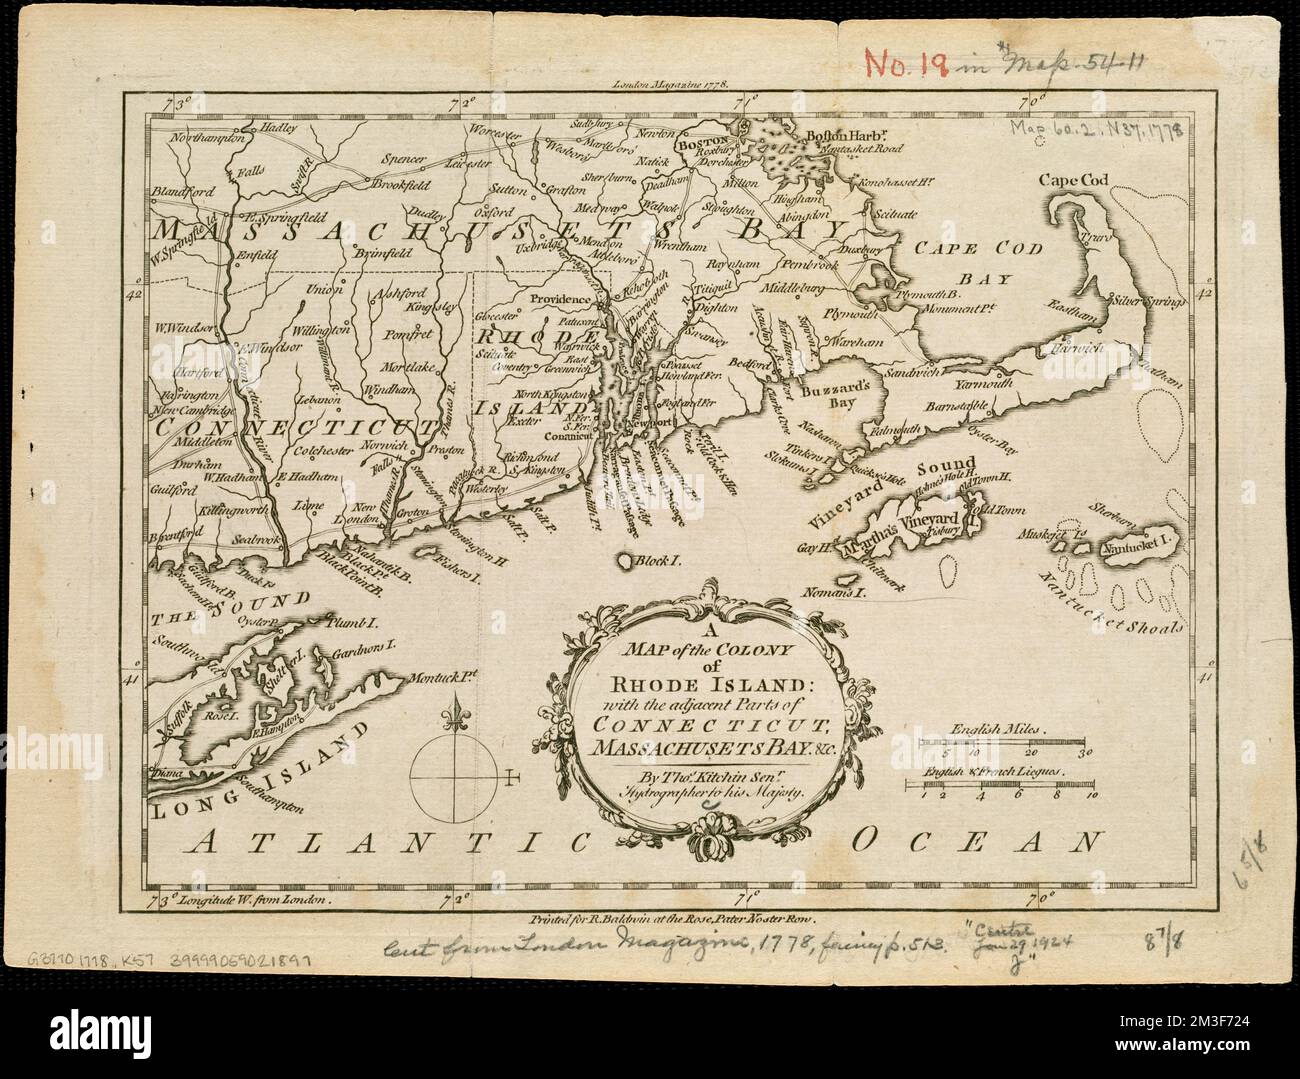 A map of the colony of Rhode Island : with the adjacent parts of Connecticut, Massachusetts Bay, &c , New England, Maps, Early works to 1800, Rhode Island, Maps, Early works to 1800, Connecticut, Maps, Early works to 1800, Massachusetts, Maps, Early works to 1800 Norman B. Leventhal Map Center Collection Stock Photo